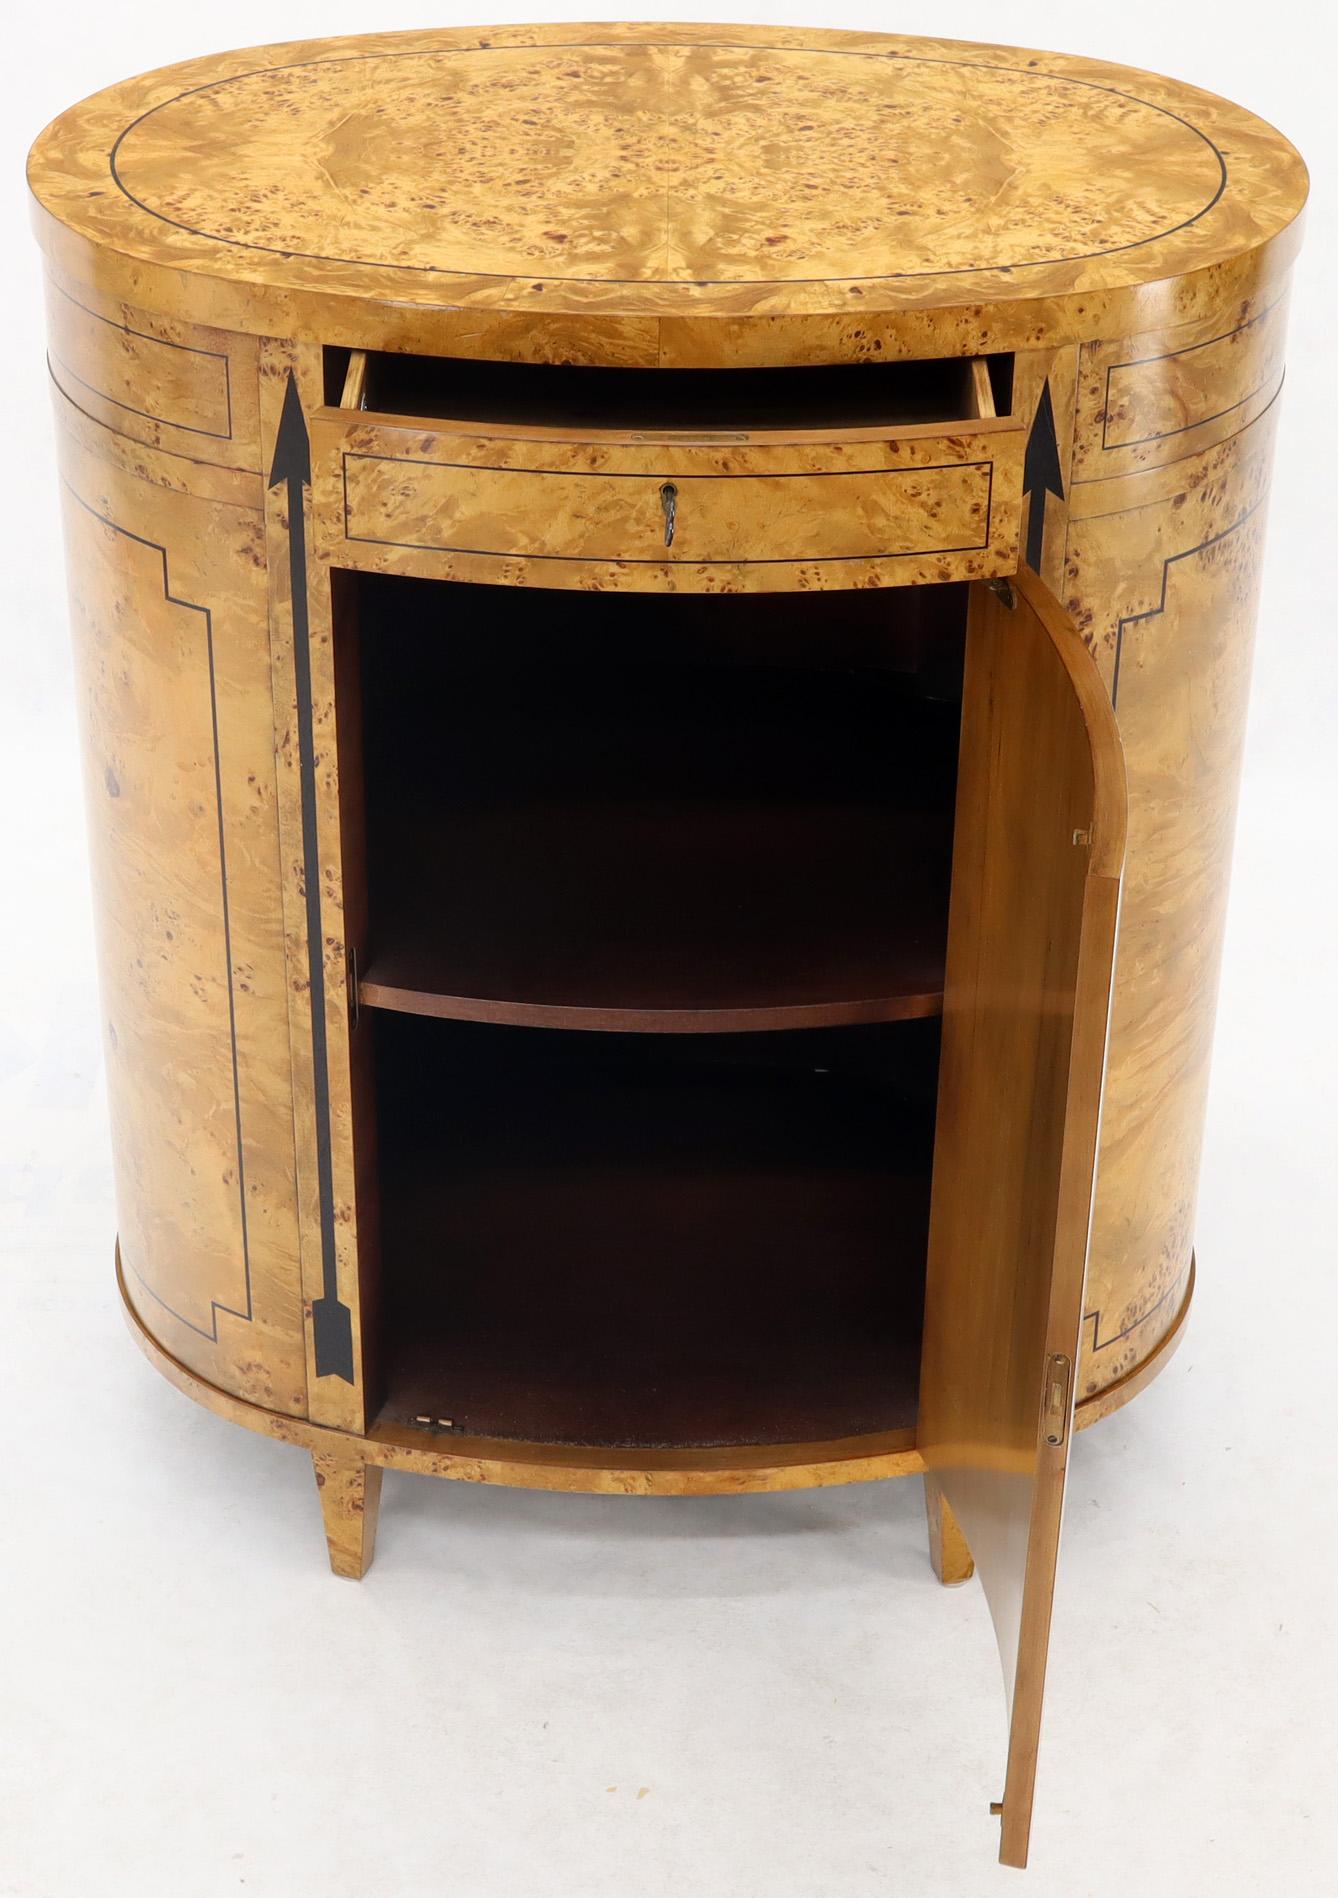 Tall Oval Burl Wood One Drawer Neoclassical Centre Cabinet by Baker Furniture 4